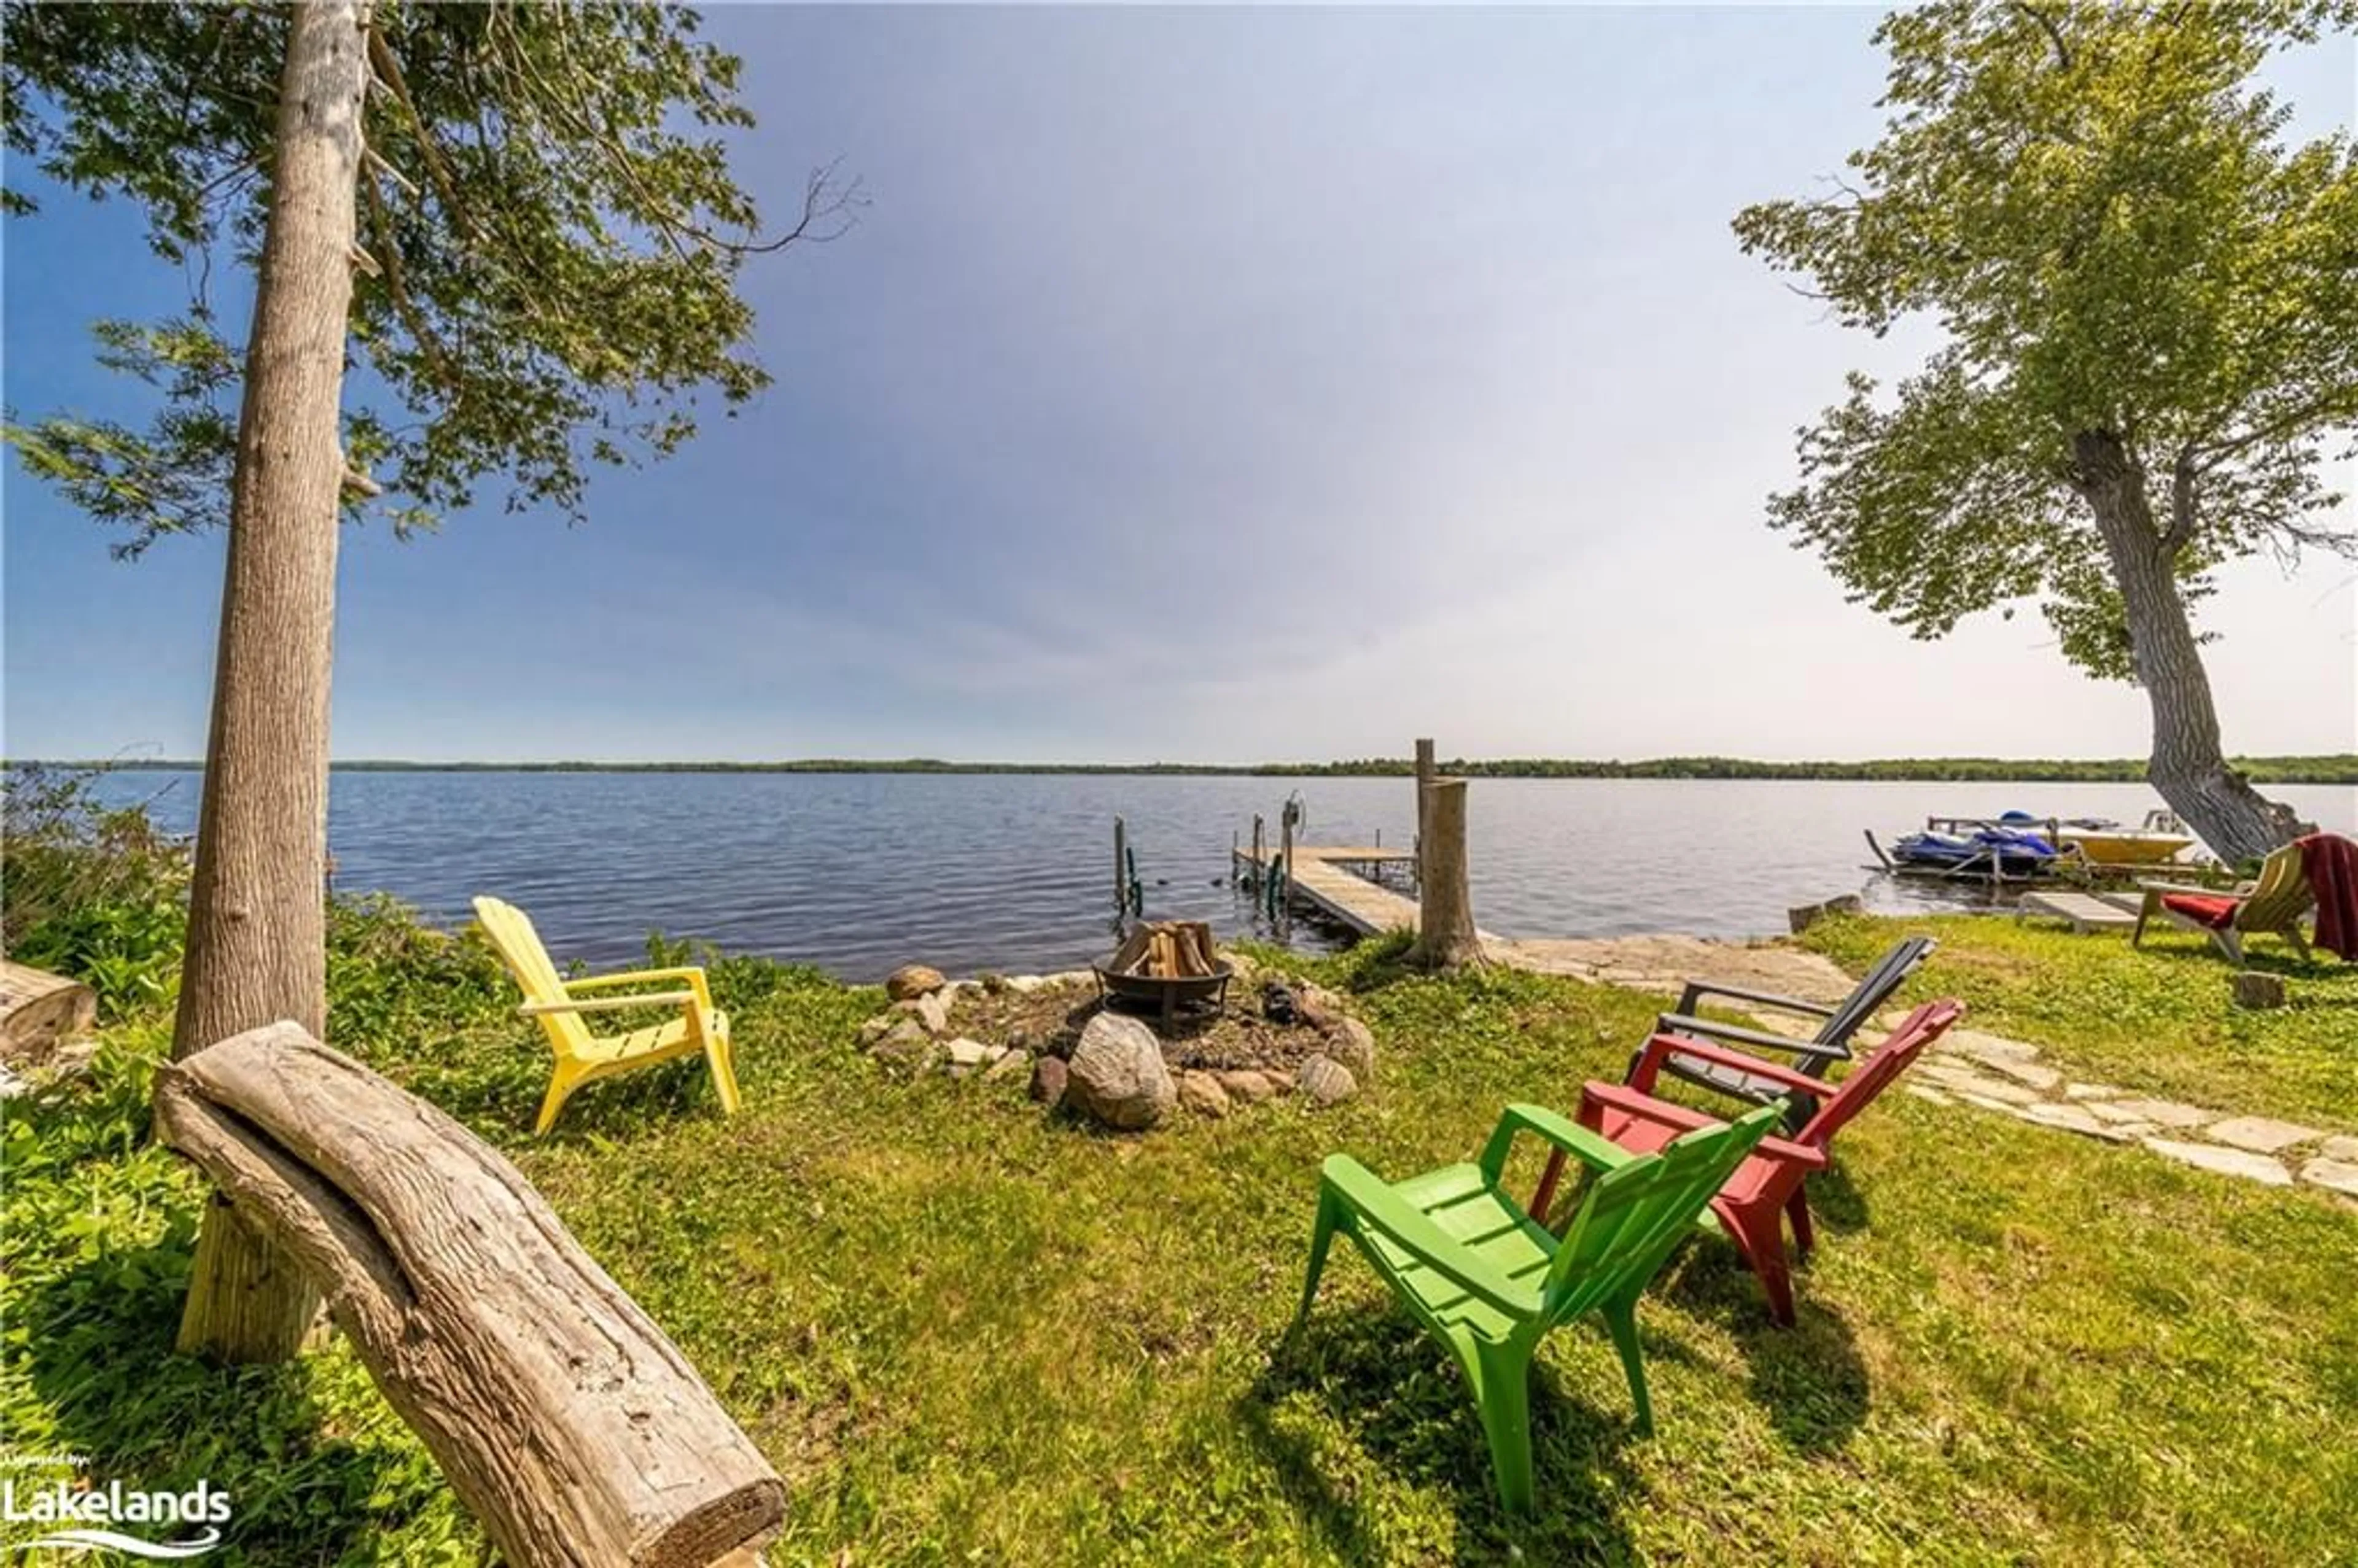 Lakeview for 43 Bayview Rd, Fenelon Falls Ontario K0M 1N0